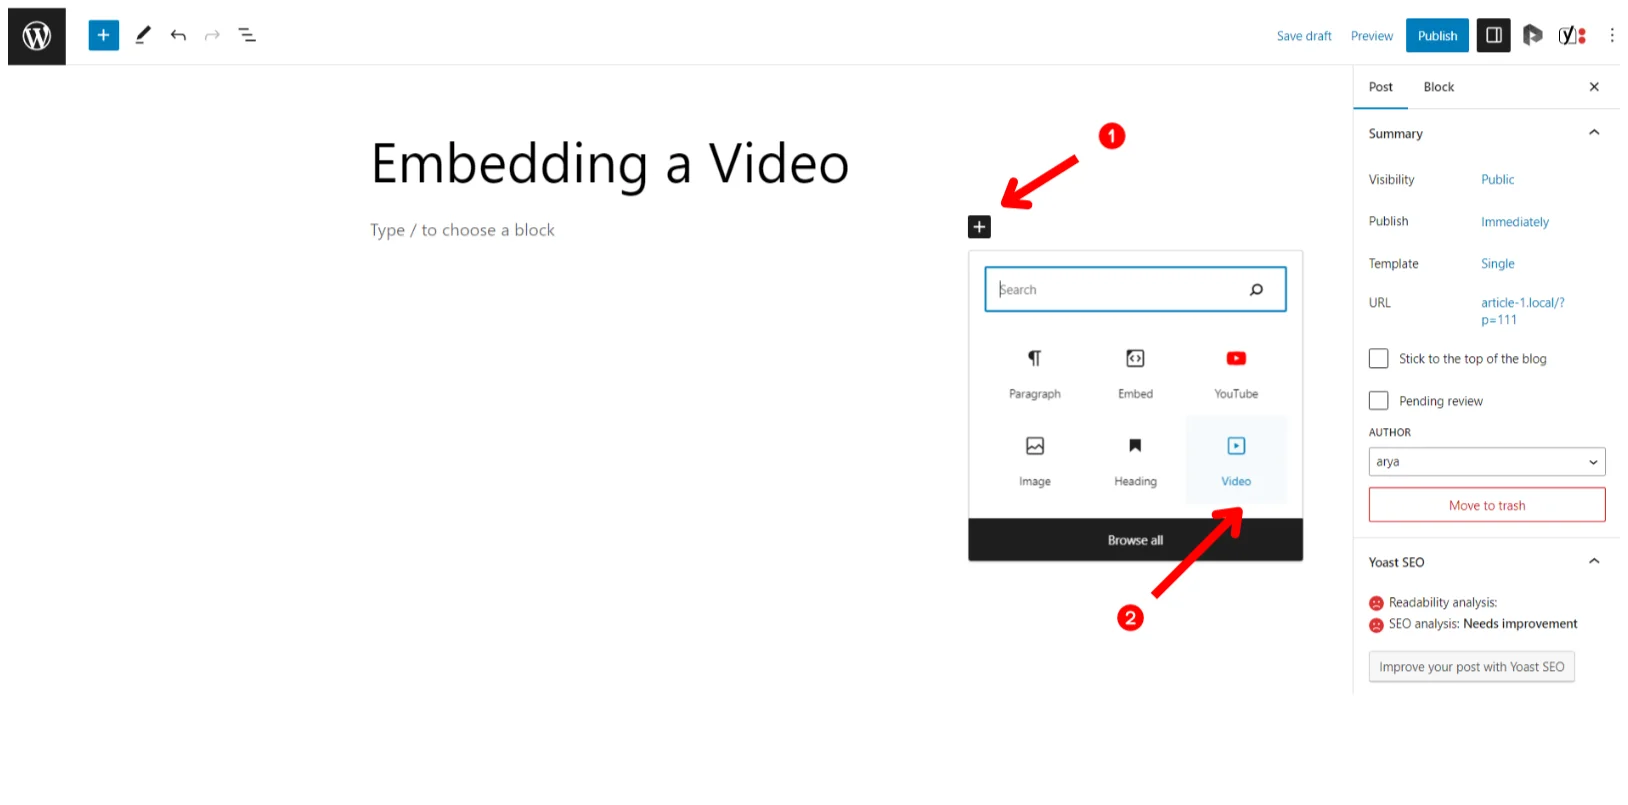 Image: Embedding a Video with the Video Block in WordPress